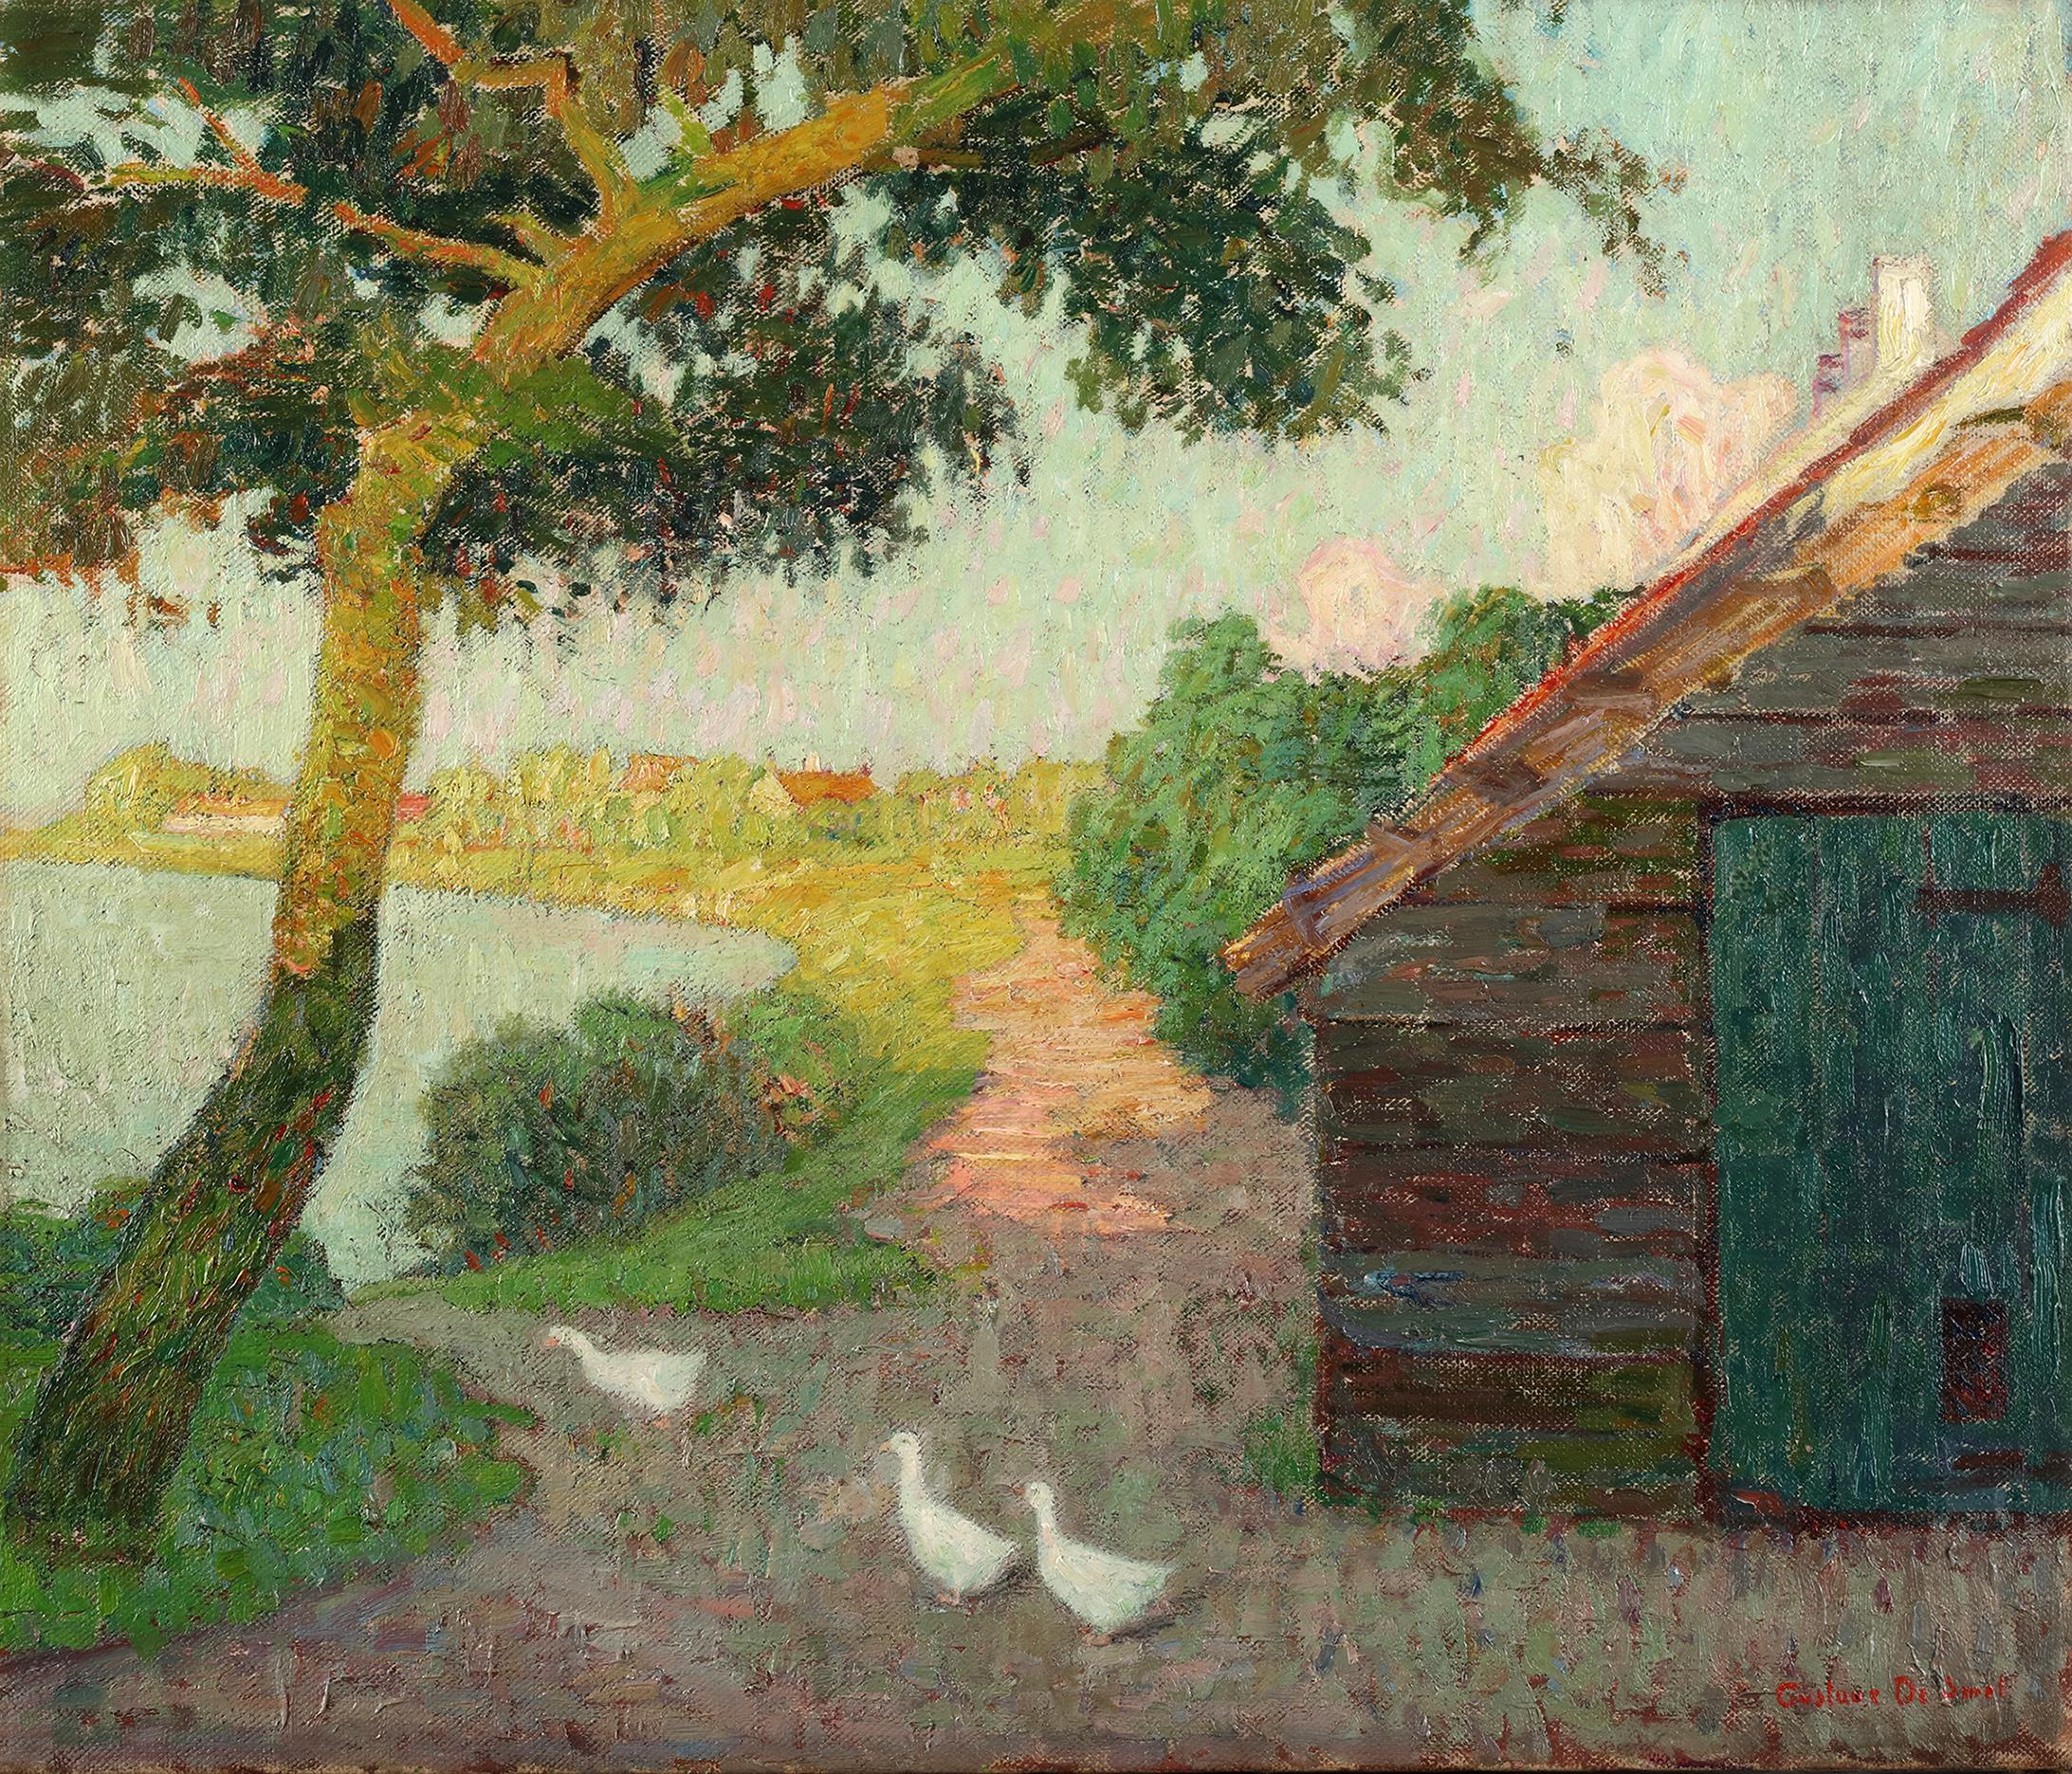 Oil on canvas
Signed lower right: “Gustave De Smet”


“Geese going into the Leie,” by Gustave De Smet captures a serene moment in the Belgian countryside. The painting invites viewers to witness a simple yet captivating scene: three geese making